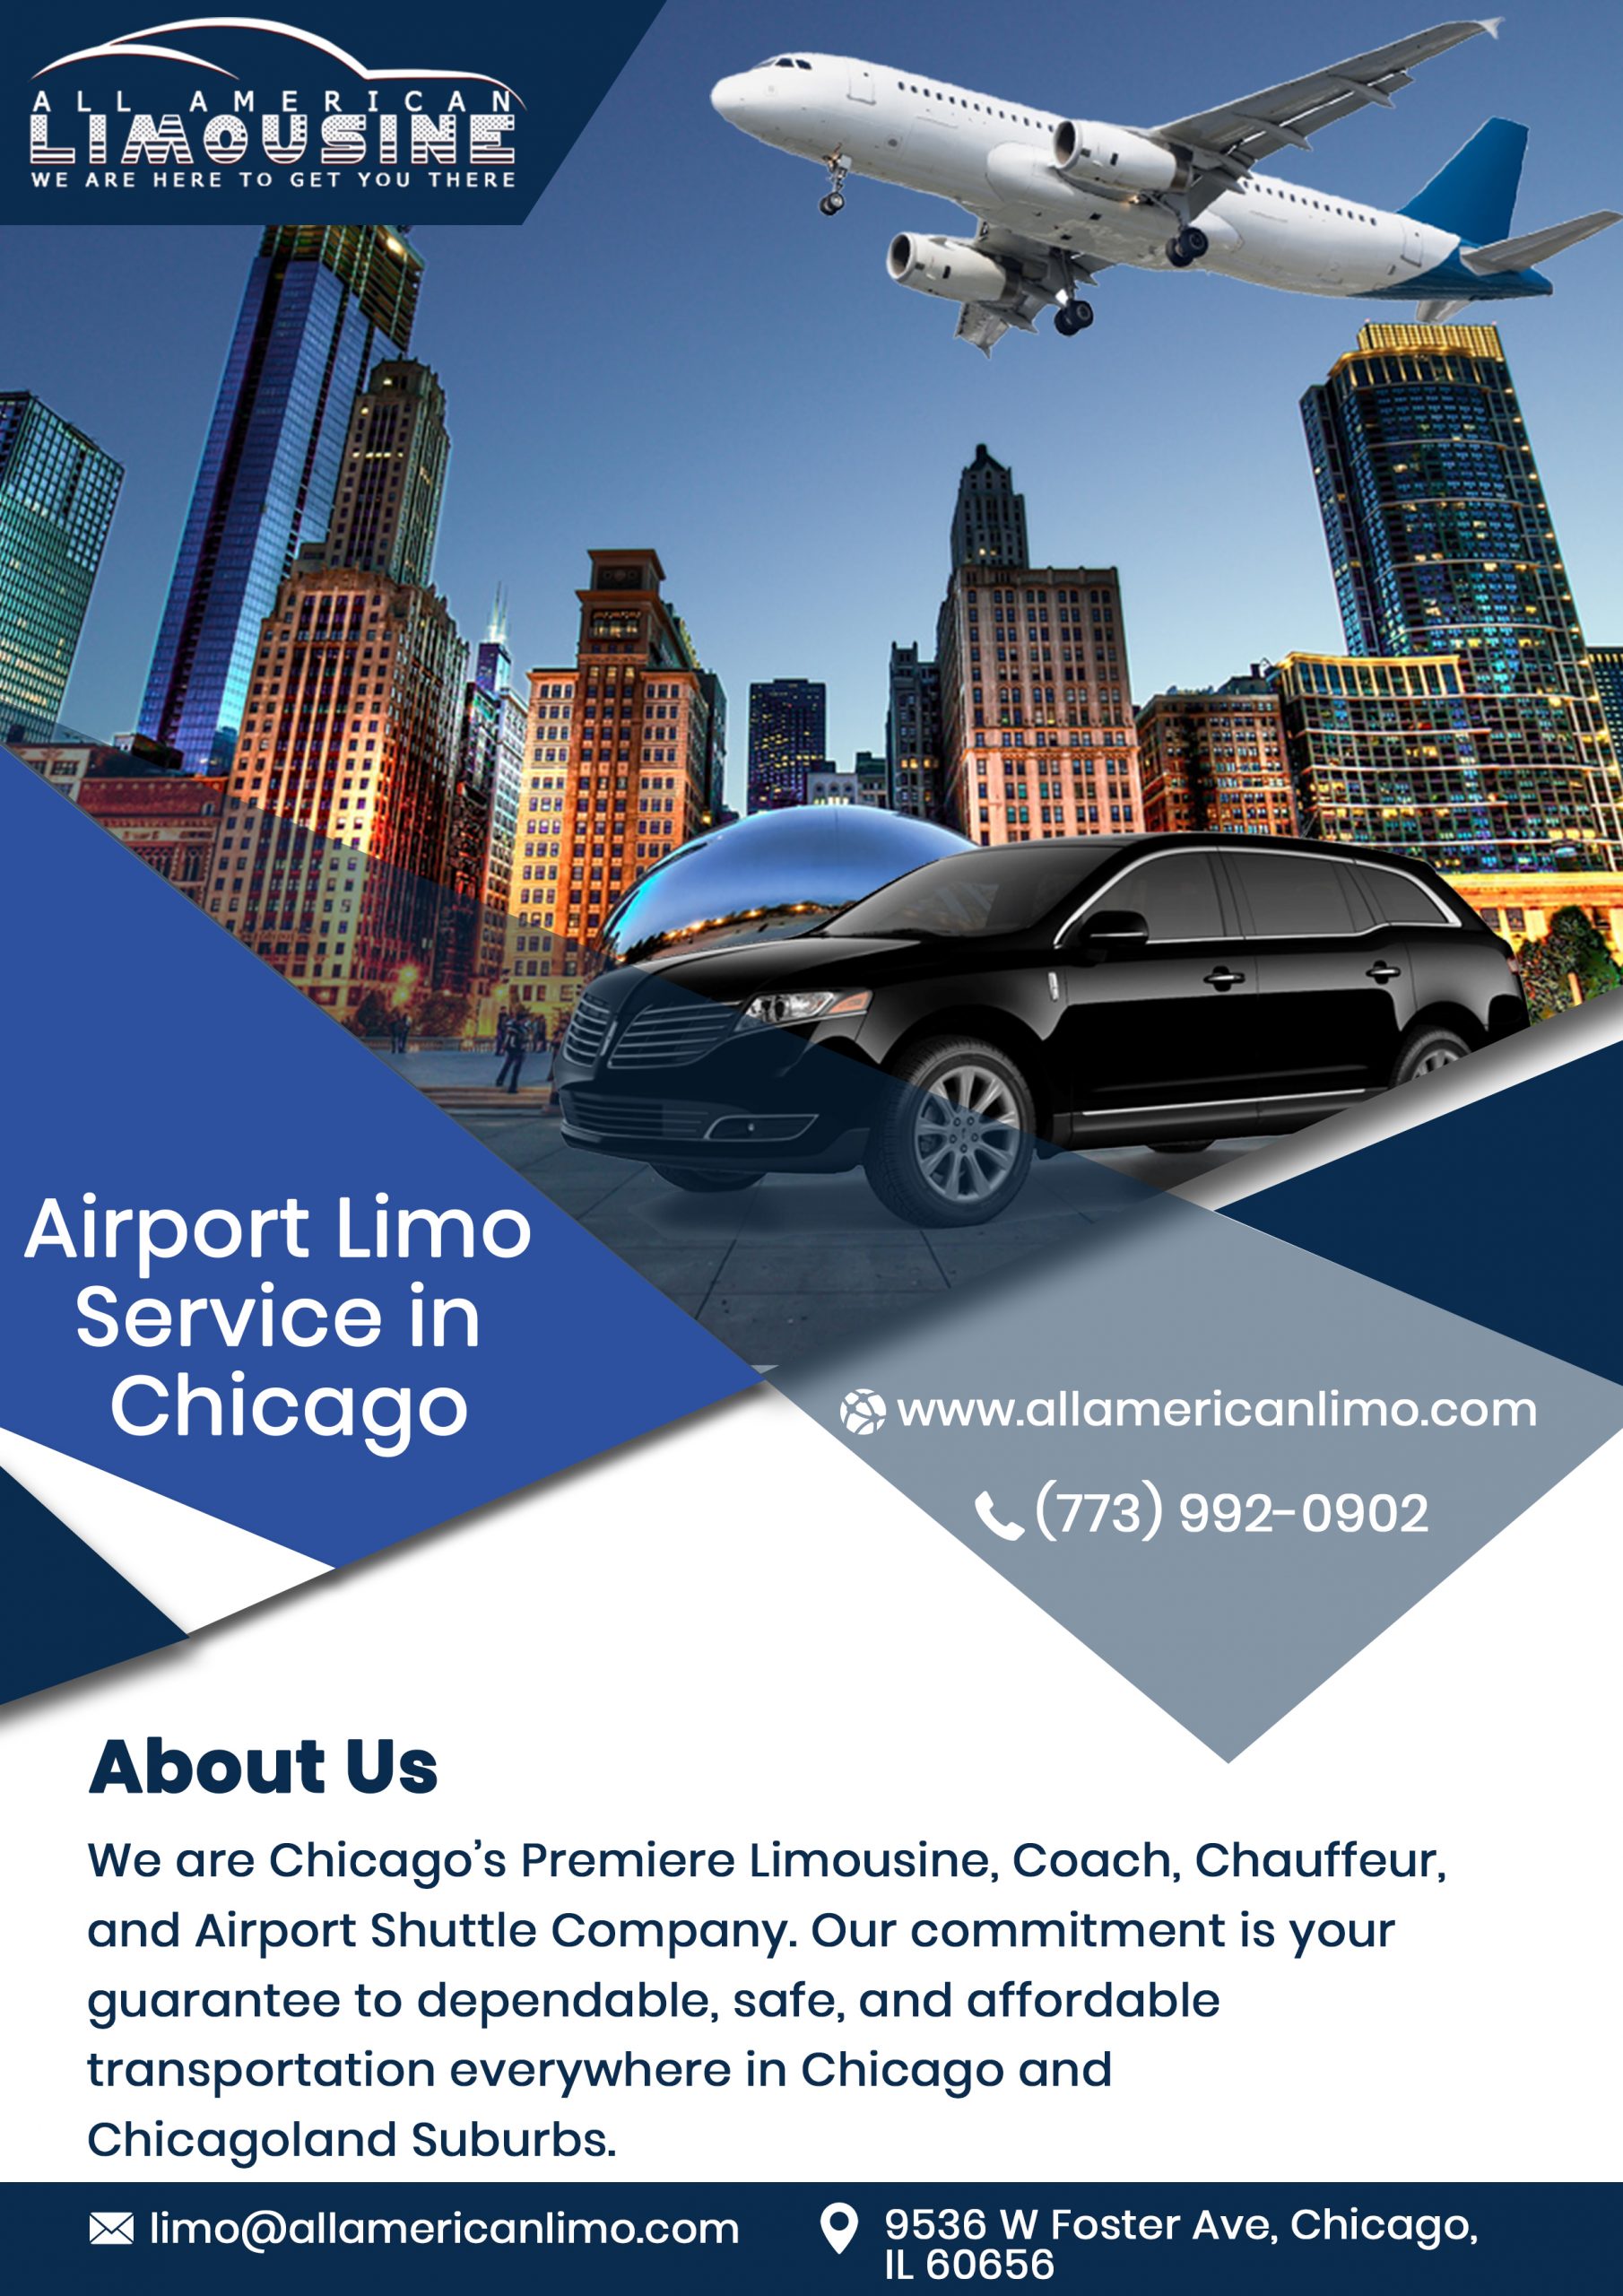 Chicago Car Service Near Me 60645, Party Bus 60645, Mercedes Sprinter Limo to 60645, Chicago Limo 60645, Limo Service 60645 to Airport, Hire, Rent, Get, Find, Car Service 60645 to Airport, Transportation Service 60645 to O'Hare, Corporate Travel 60645, Airport Travel 60645